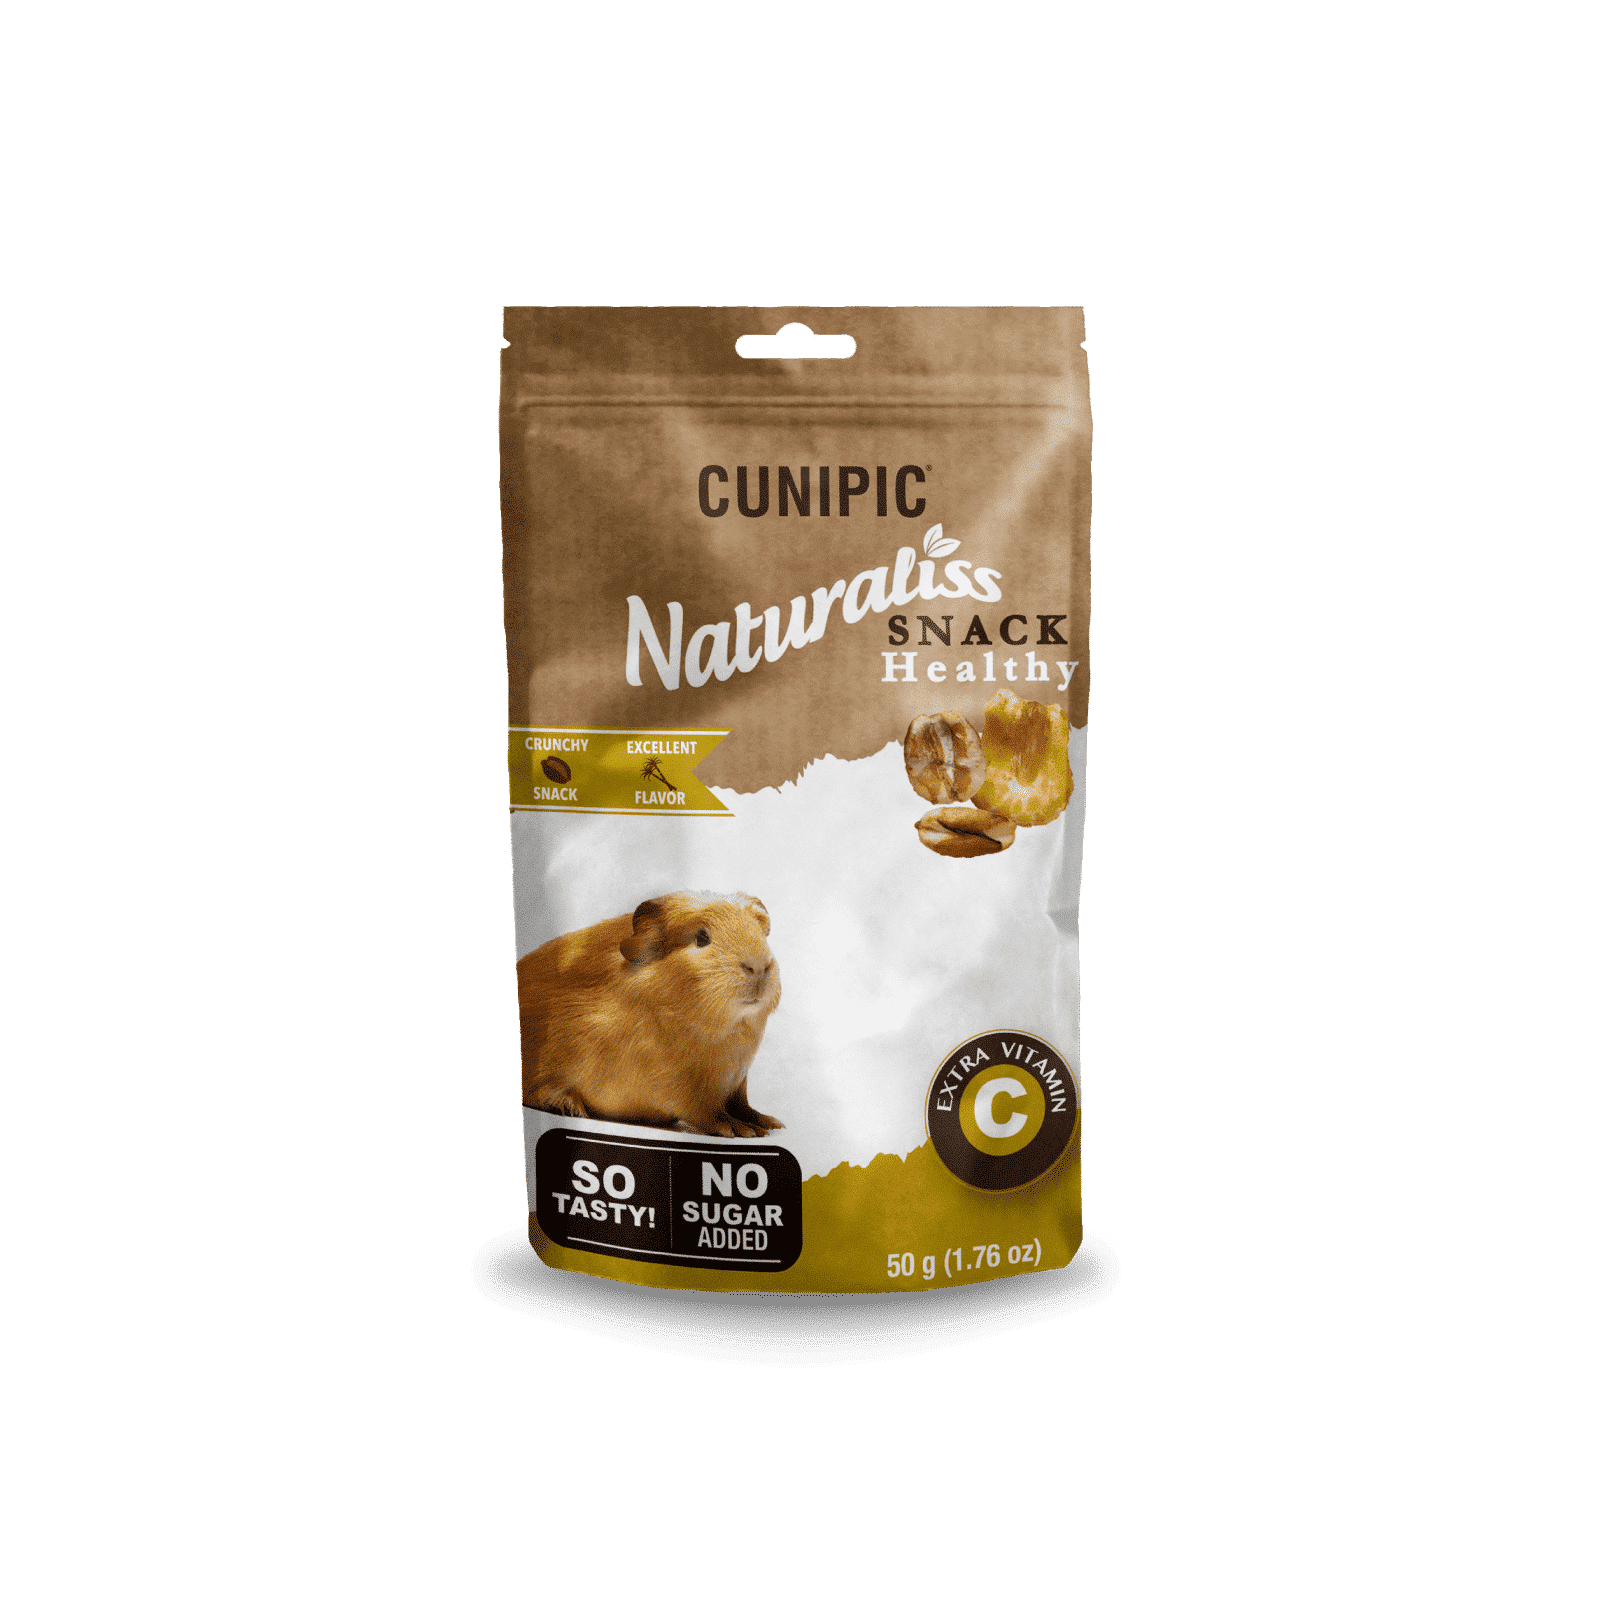 Naturaliss Healthy Vitamin C Snack 50 g Cunipic